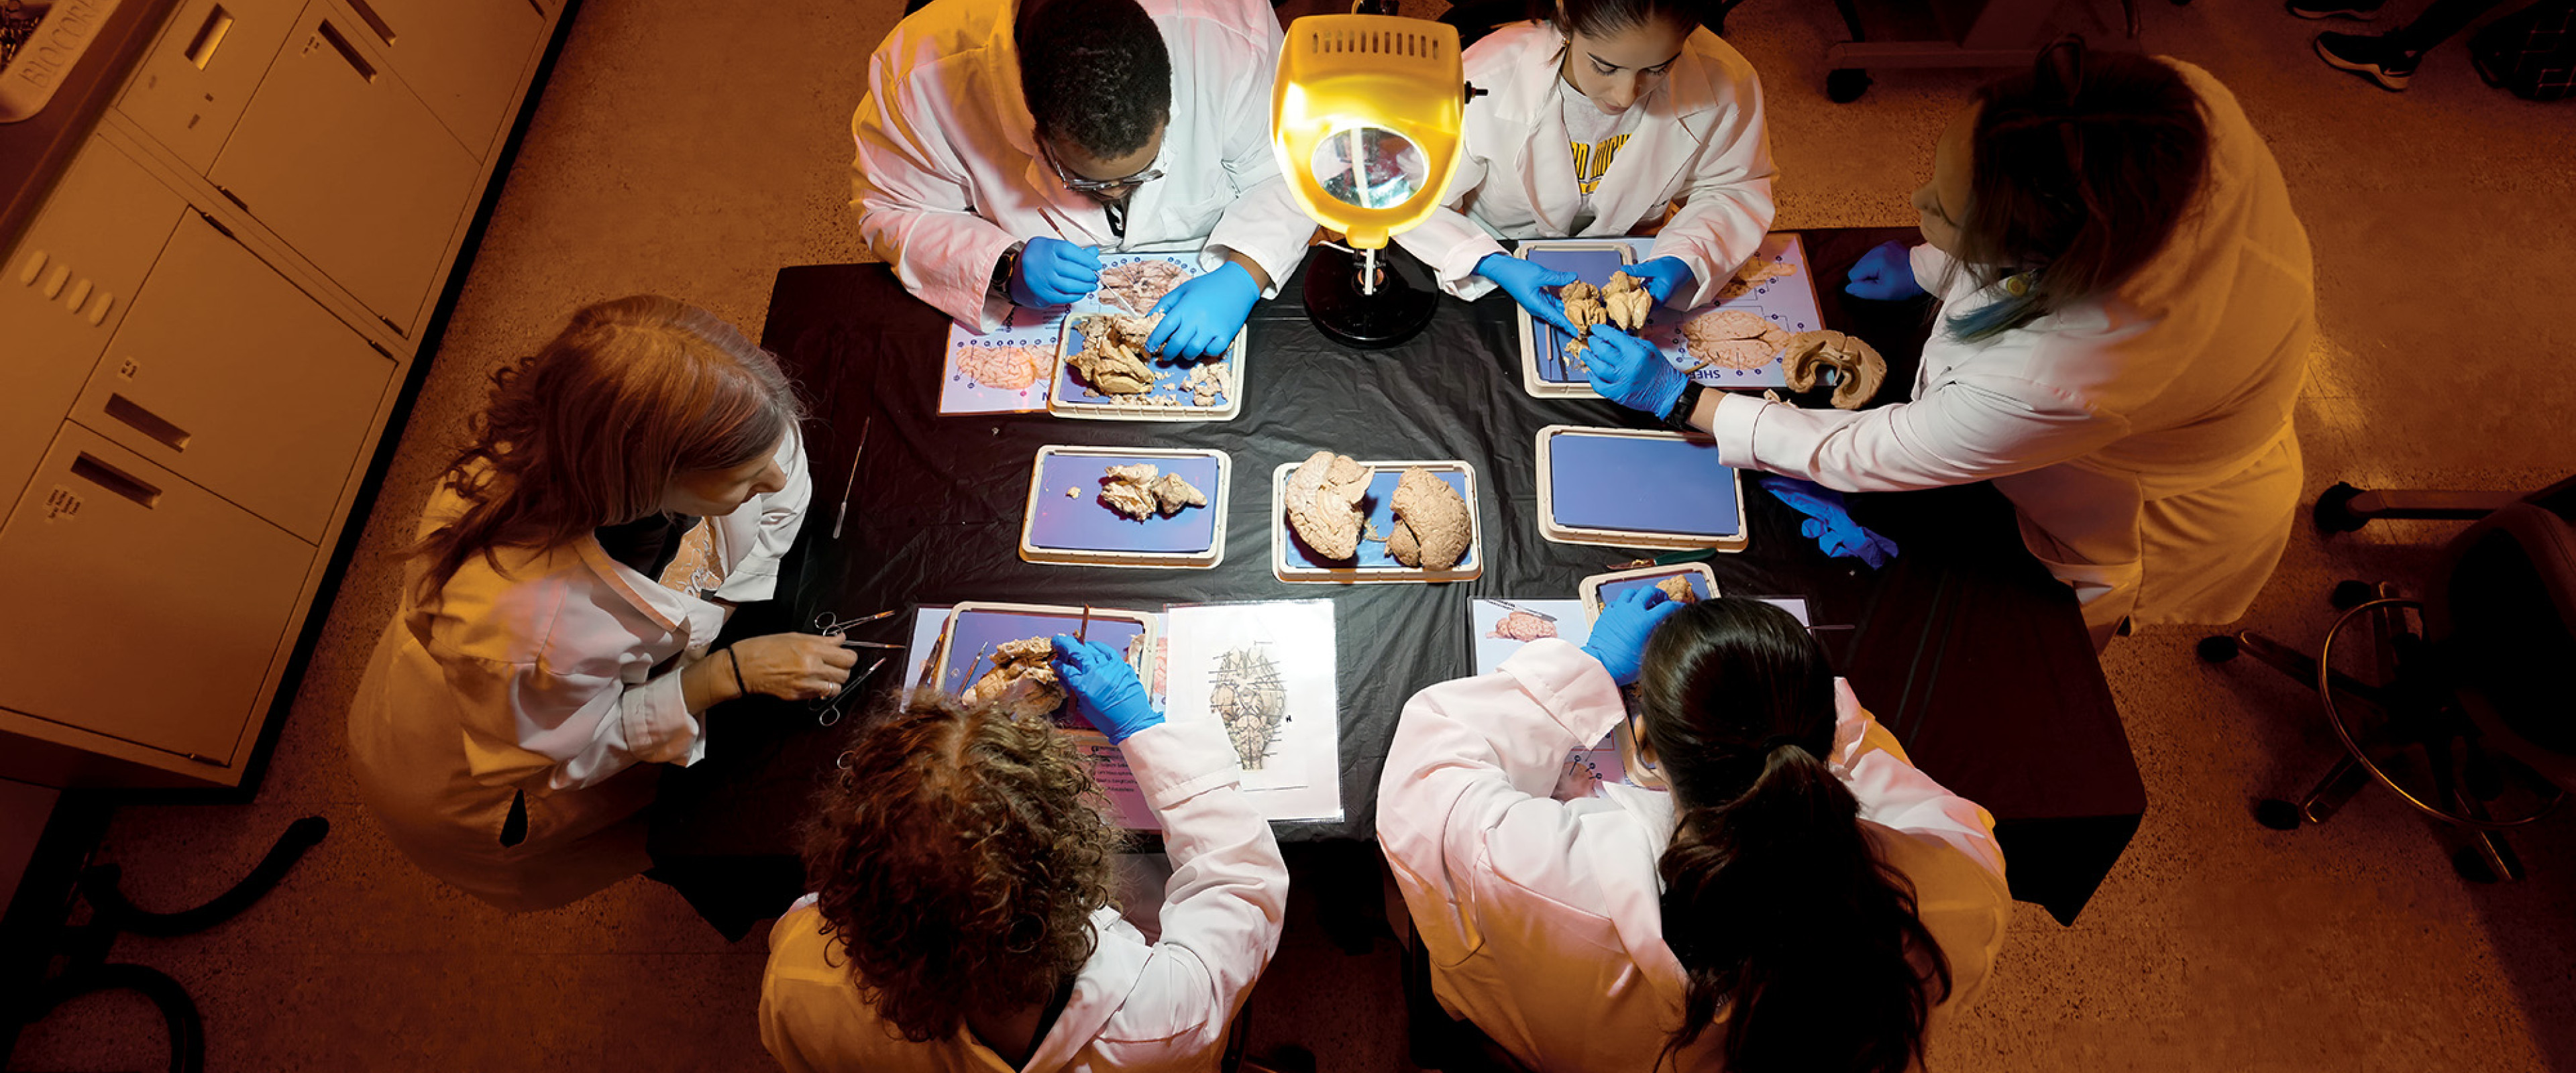 Students disecting animal brains in a lab.